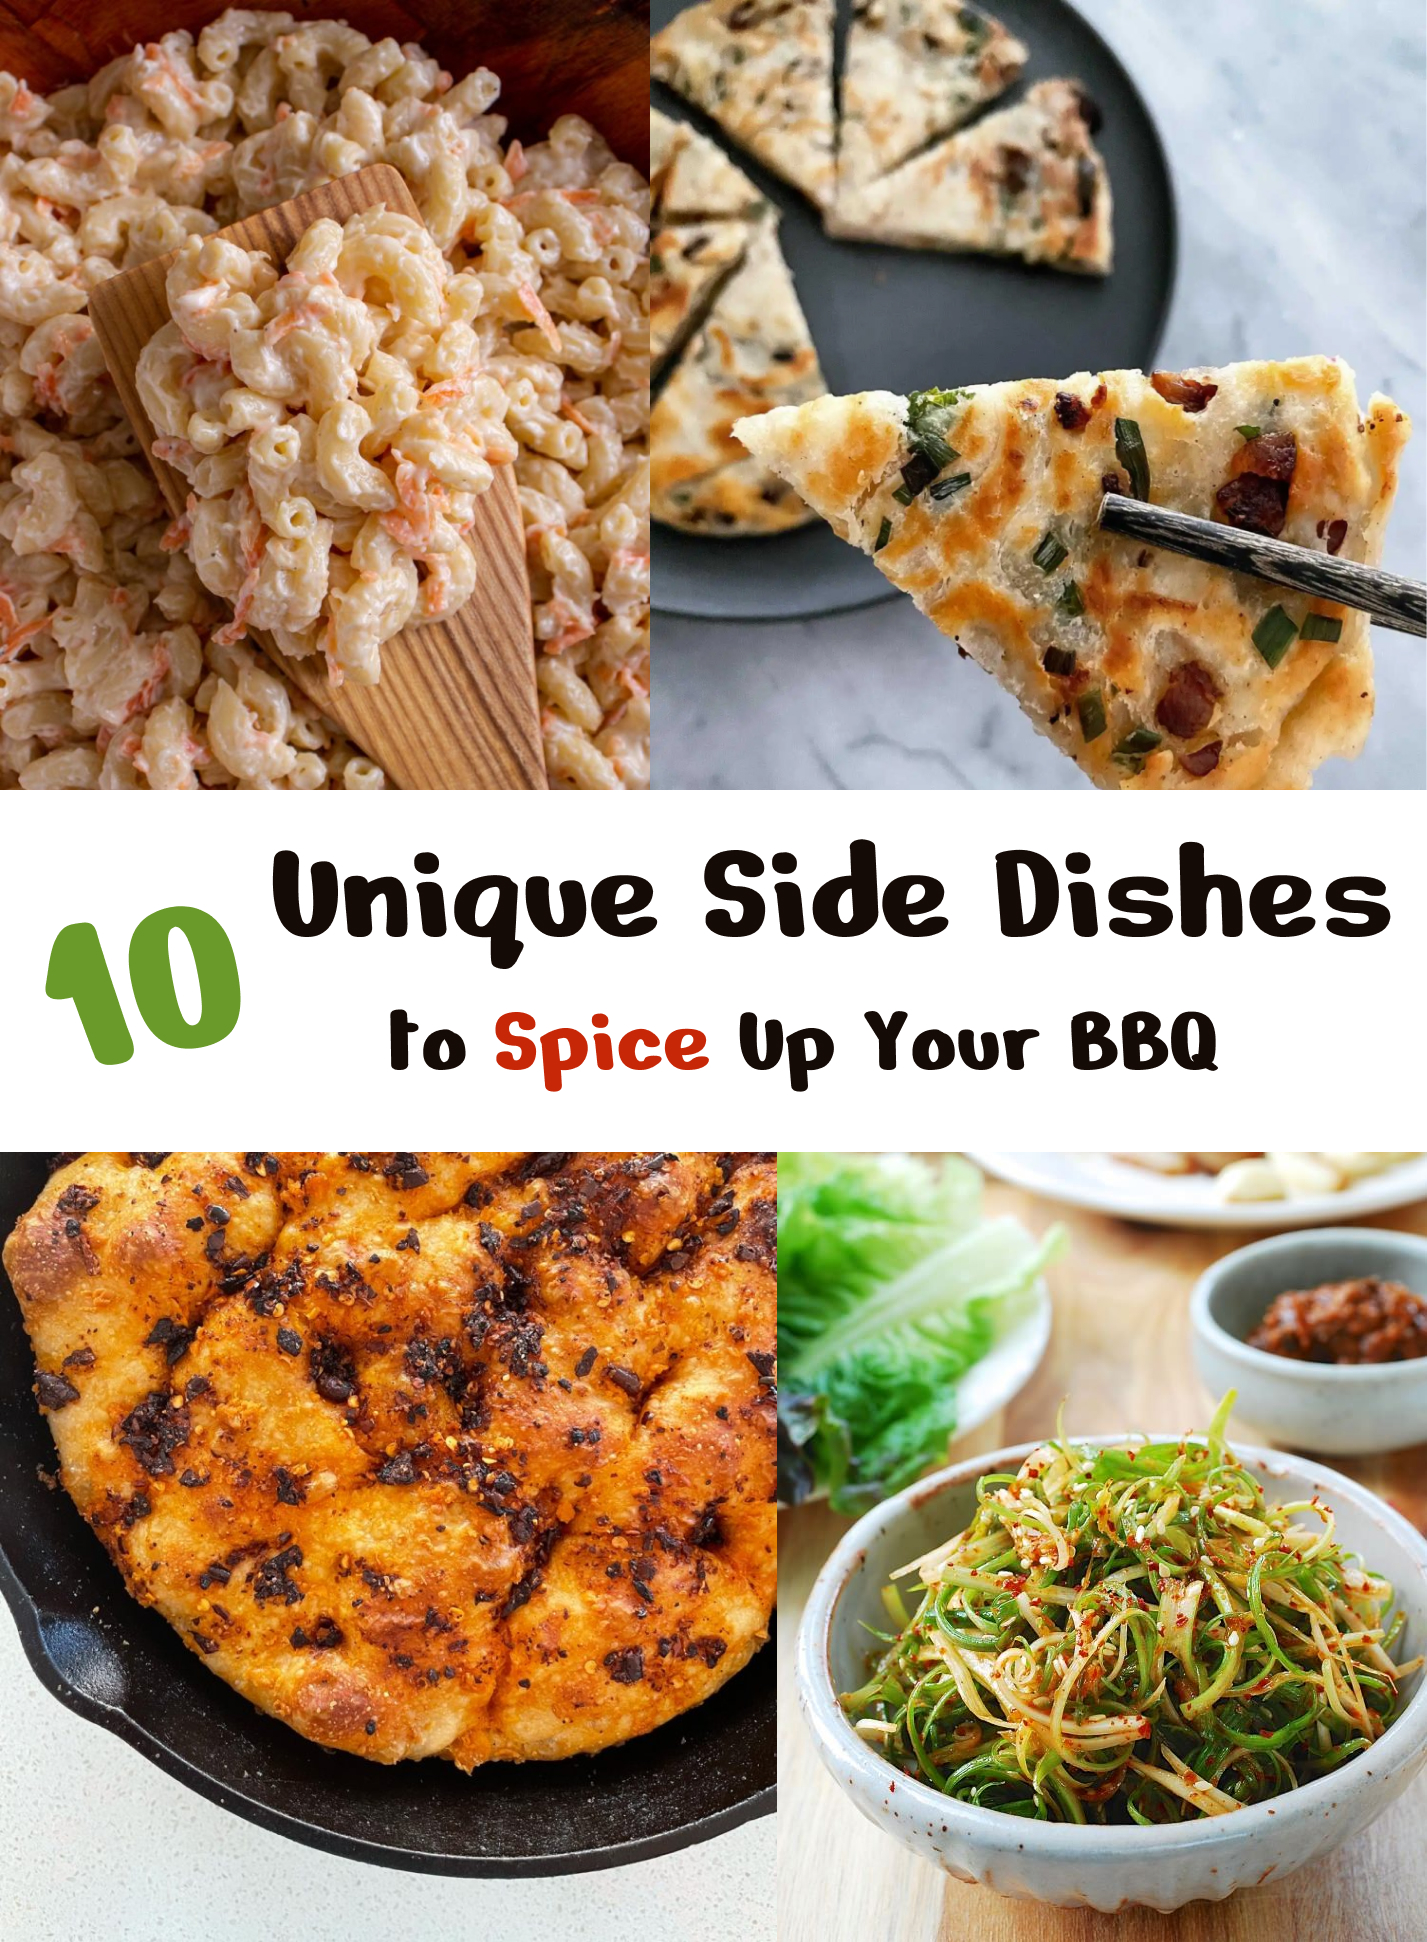 Spice up your BBQ with these 10 unique globally inspired side dishes